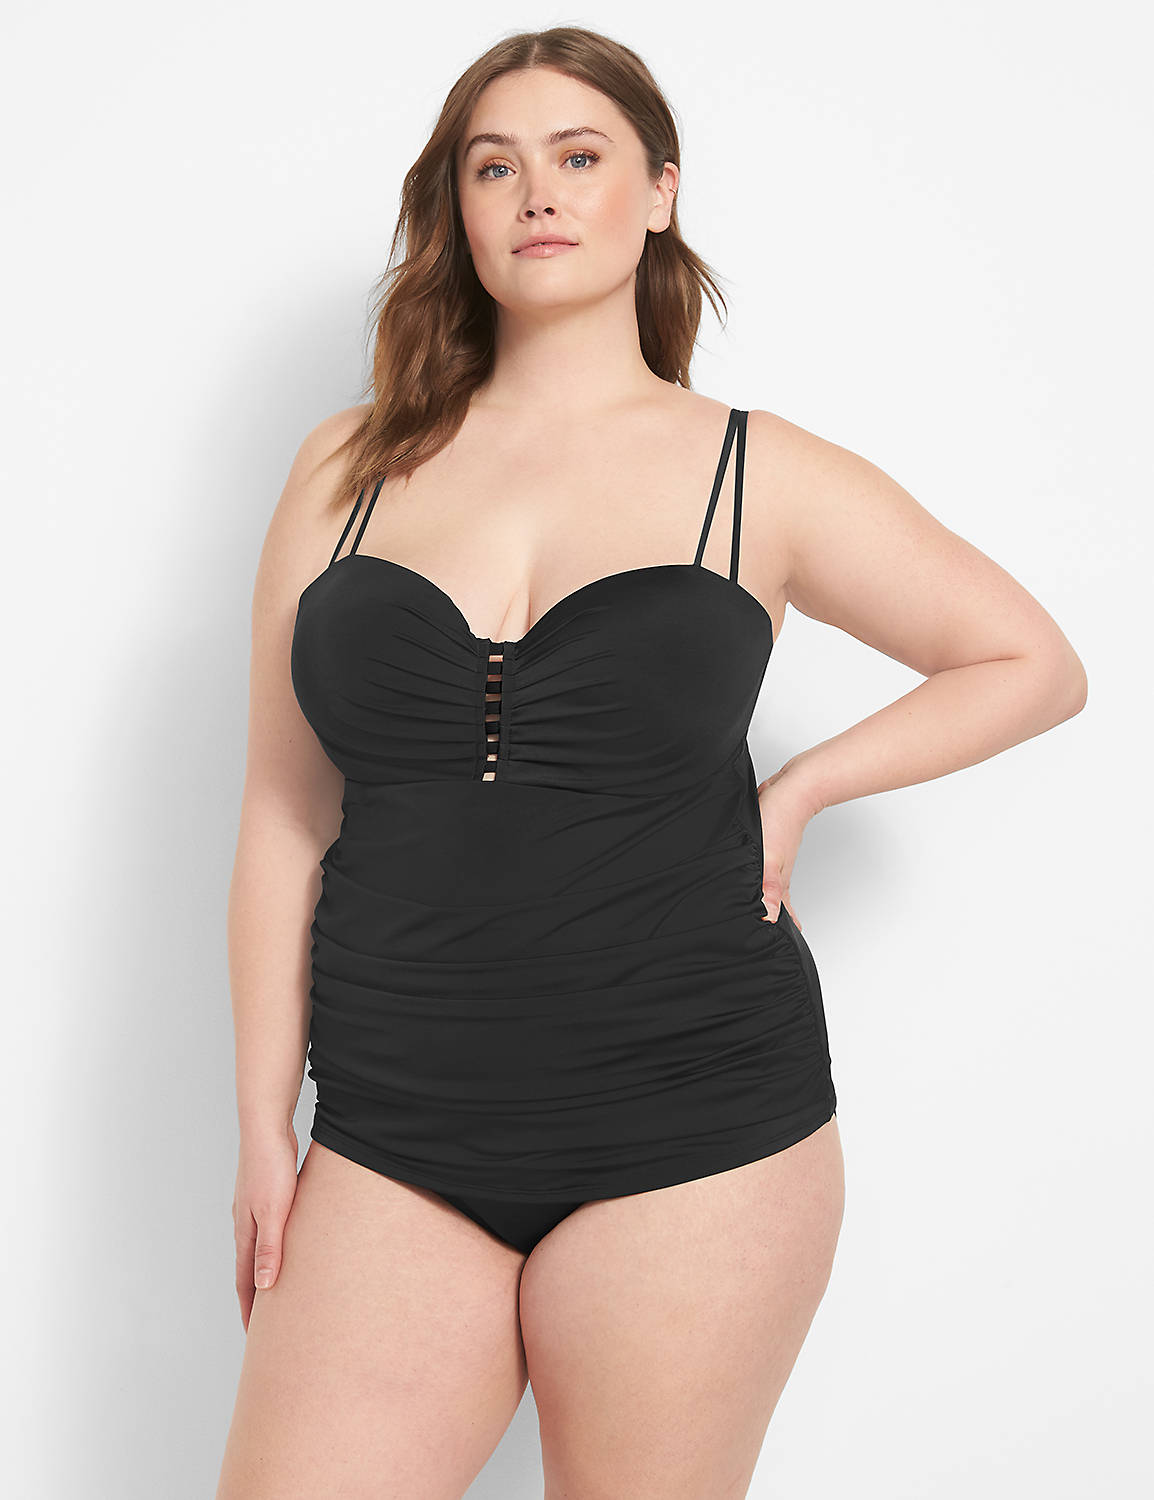 UW Fitted Tankini 1117753 Product Image 1